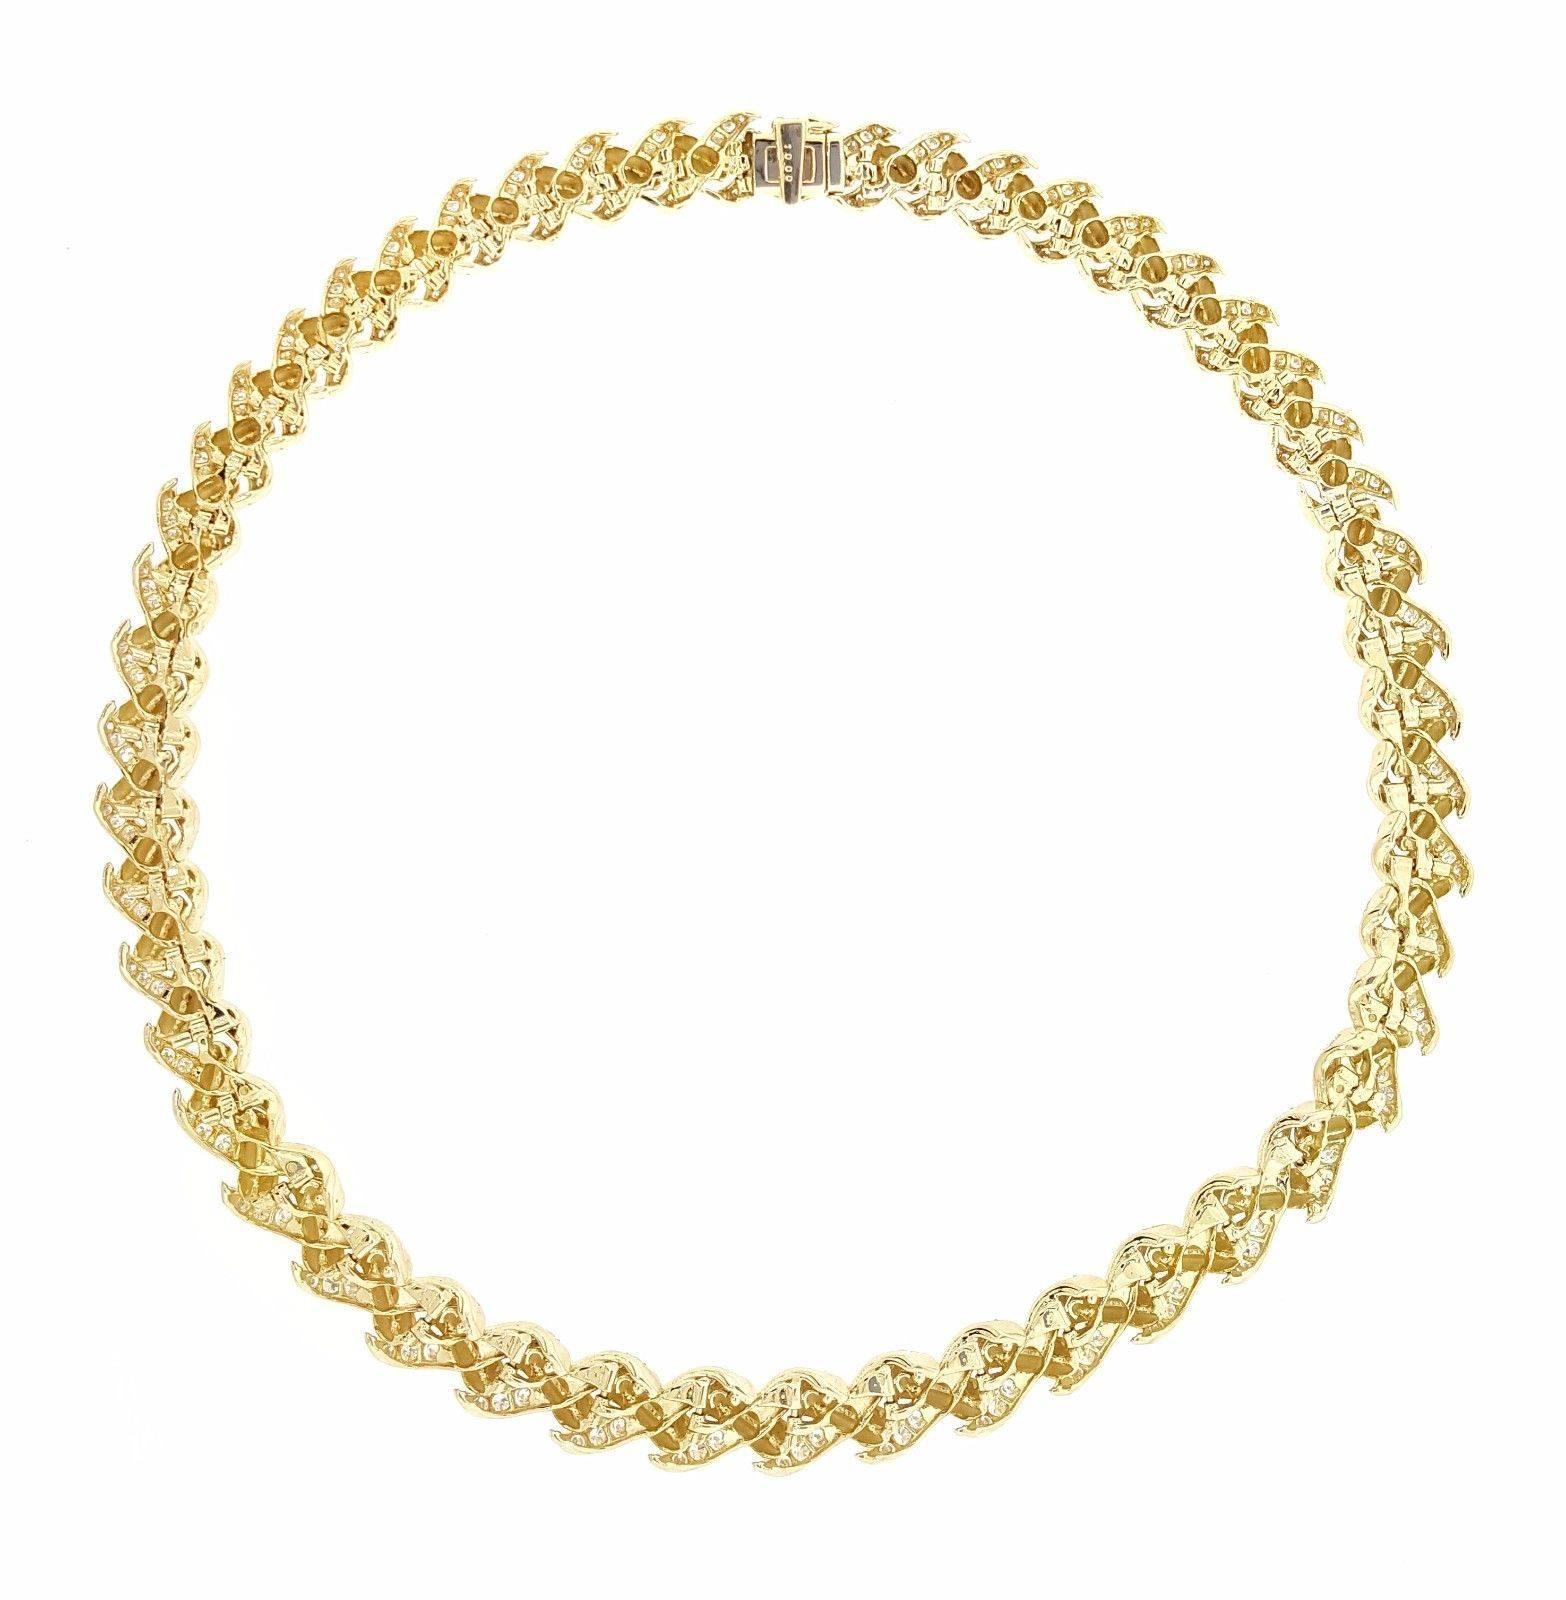 French Diamond Choker Necklace with 10.00 Carats in 18 Karat Yellow Gold 3